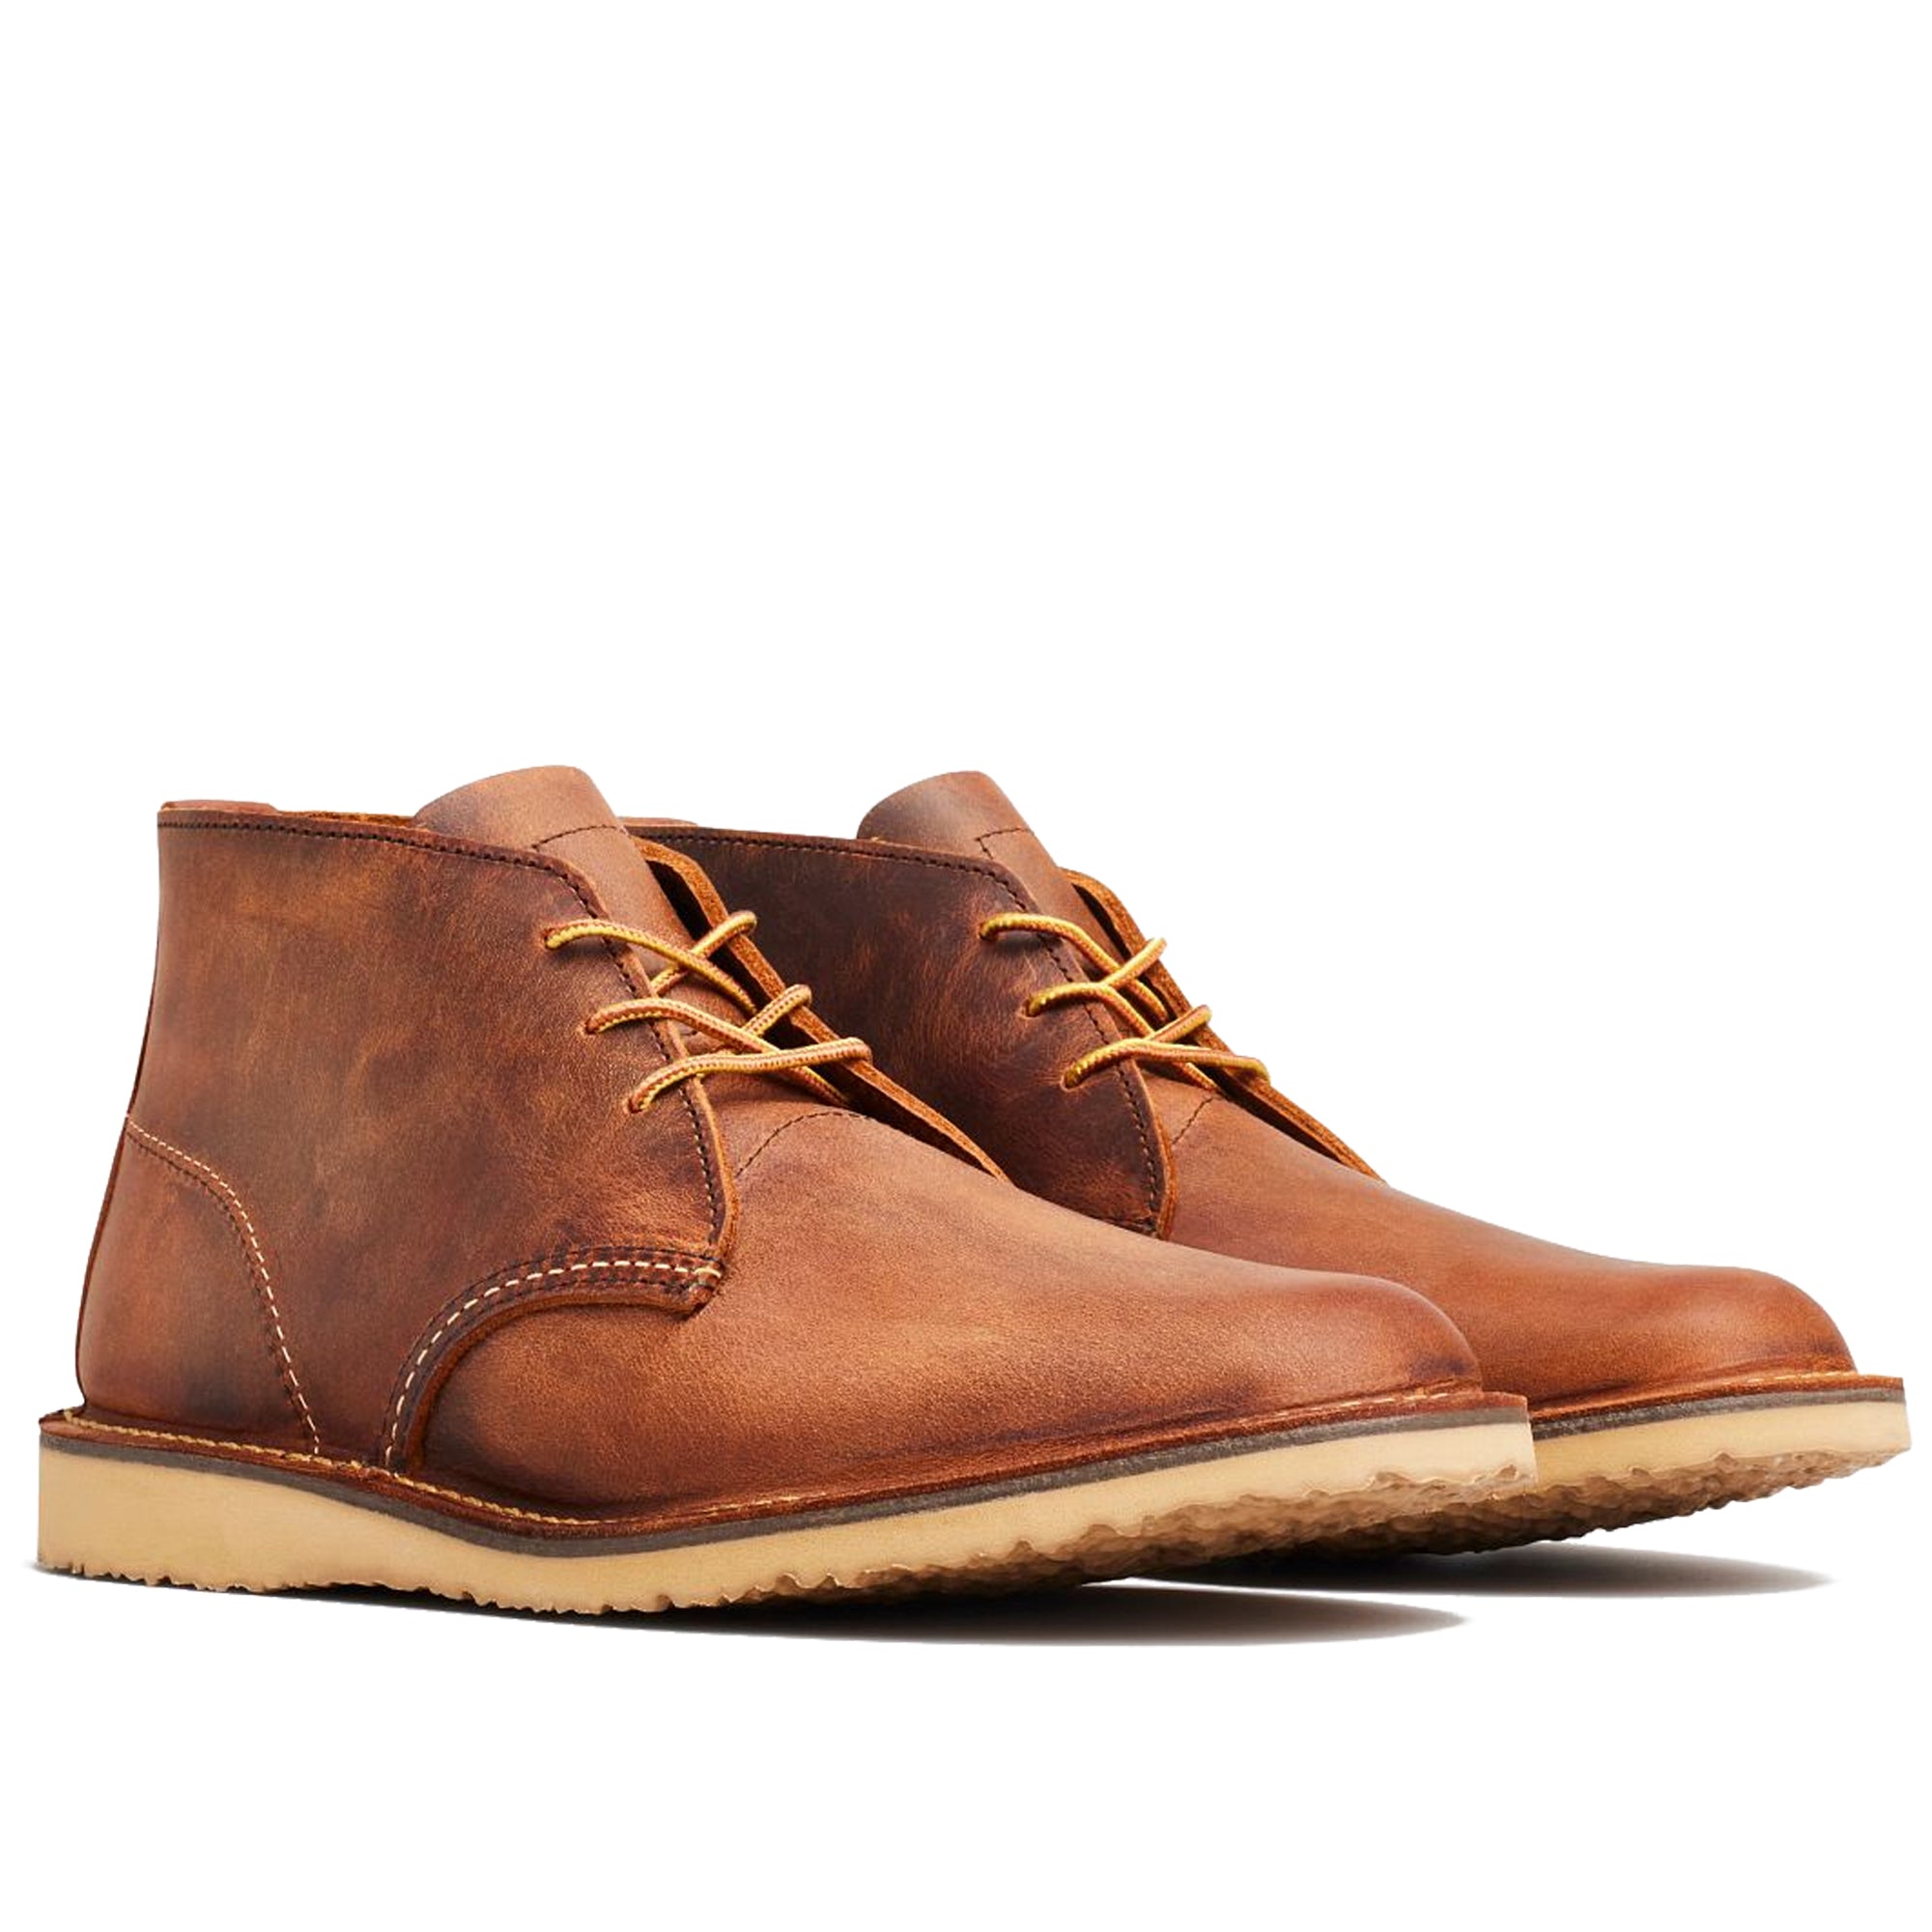 Red Wing 3322 Weekender Chukka Boot -  Copper Rough & Tough